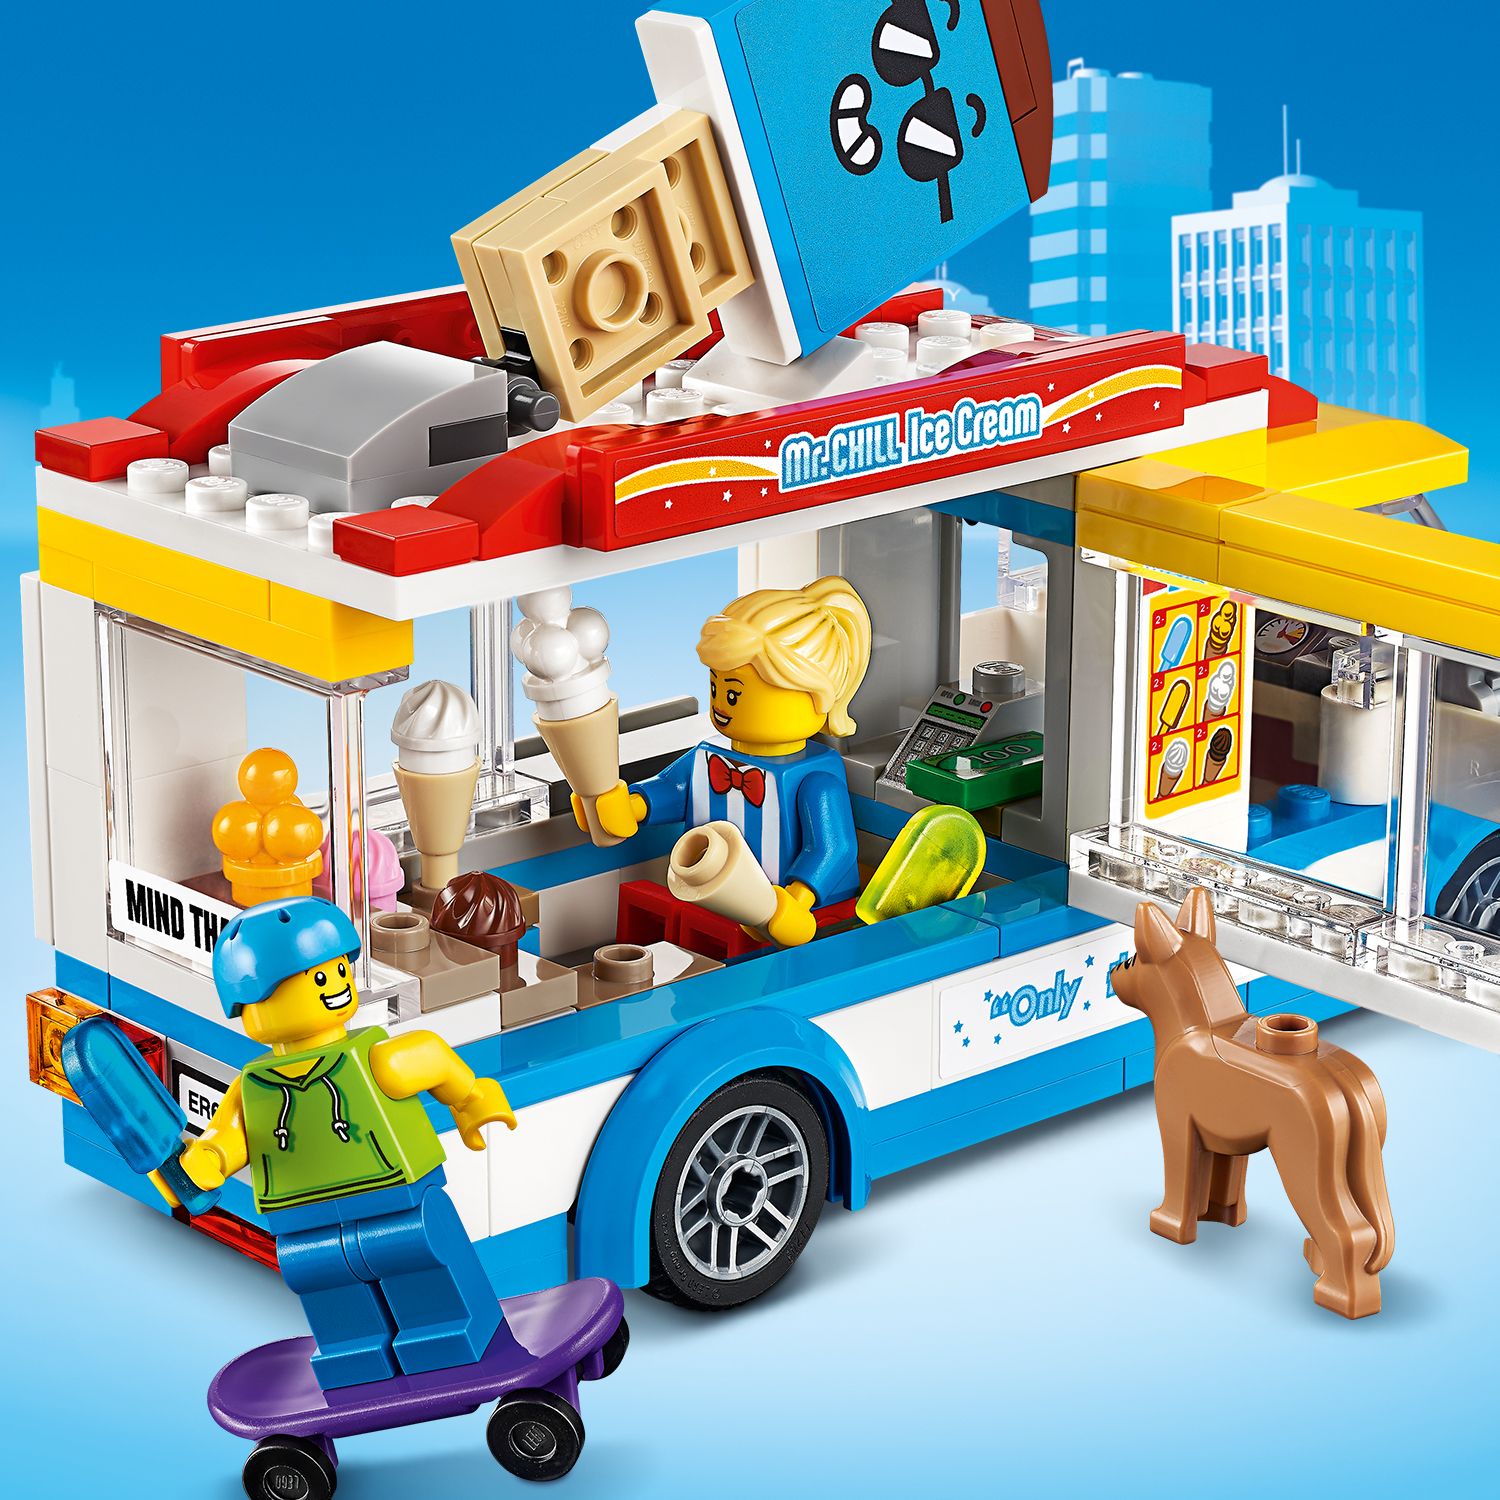 LEGO City Ice Cream Truck Van 60253 Building Toy Set - Featuring Skater Minifigures, Skateboard, and Dog Figure, Fun Gift Idea for Boys, Girls, and Kids Ages 5+ - image 5 of 10